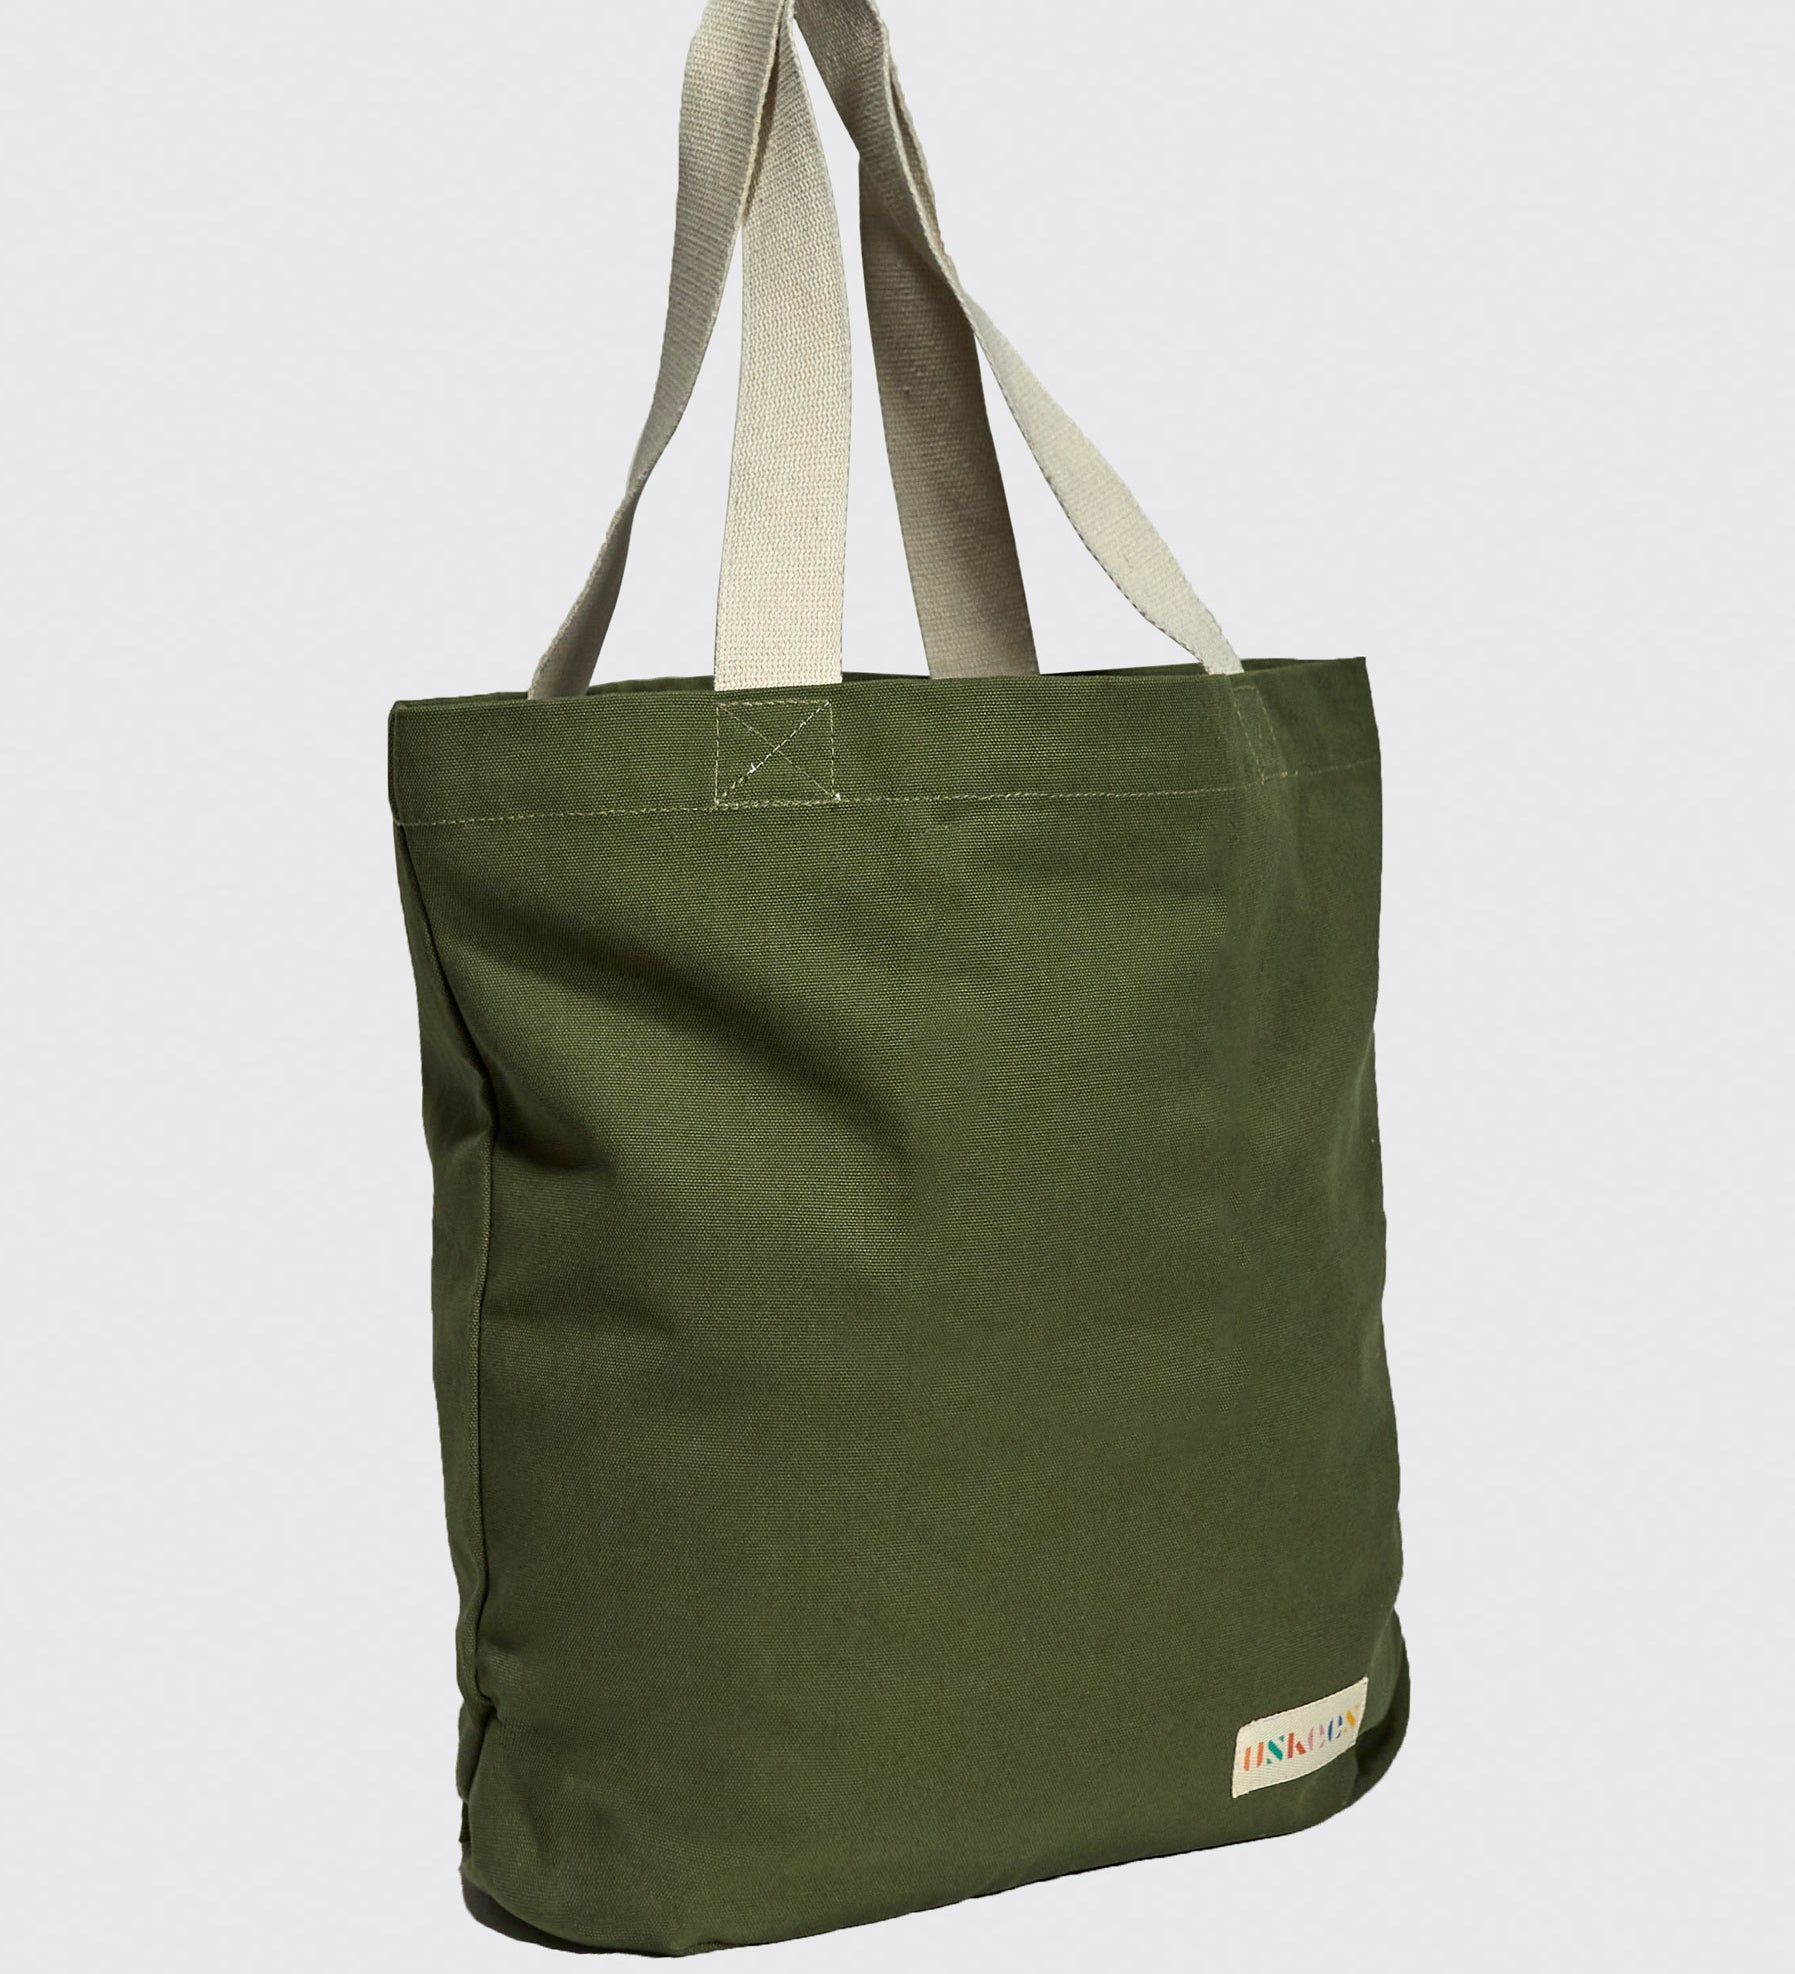 Slightly angled front view of Uskees #4009 'coriander' coloured canvas tote bag, showing double webbing straps and Uskees woven logo.